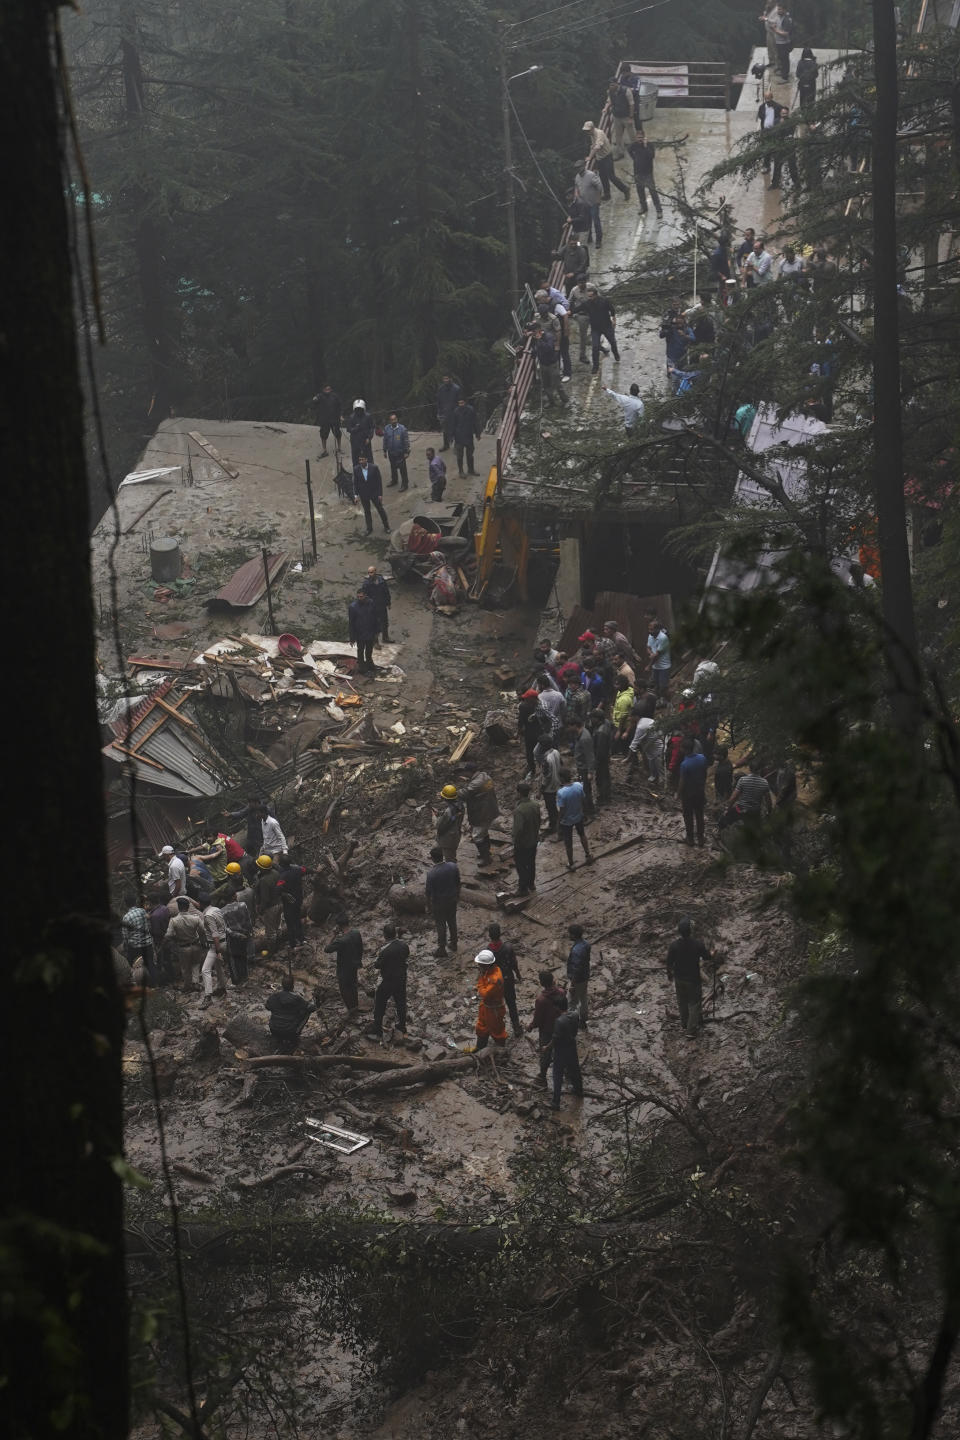 Rescuers remove mud and debris as they search for people feared trapped after a landslide near a temple on the outskirts of Shimla, Himachal Pradesh state, Monday, Aug.14, 2023. Heavy monsoon rains triggered floods and landslides in India's Himalayan region, leaving more than a dozen people dead and many others trapped, officials said Monday. (AP Photo/ Pradeep Kumar)